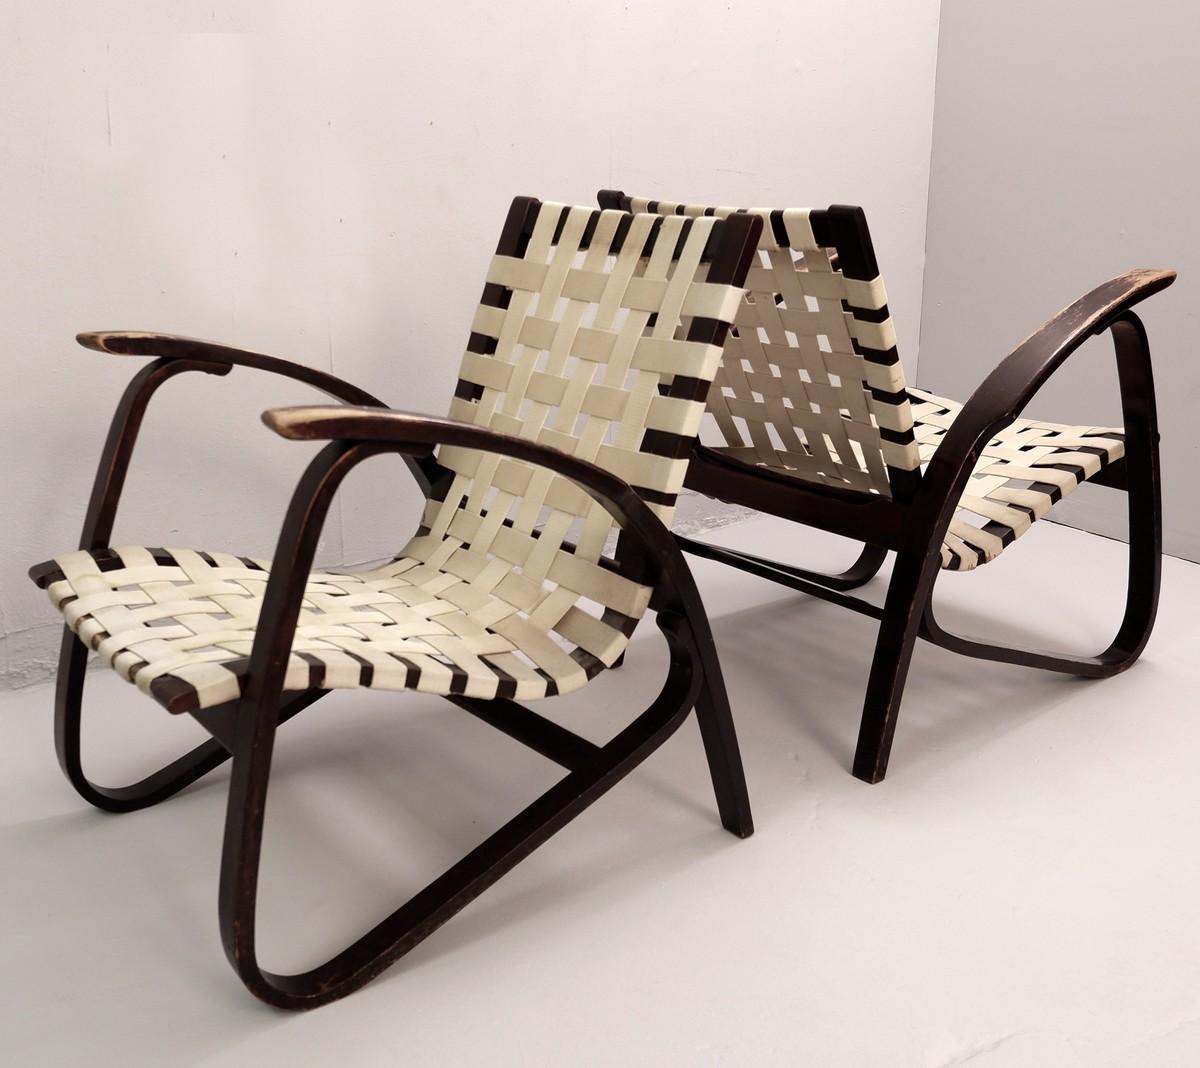 Pair of lounge chairs by Jan Vanek for UP Závody, Czech, 1930s.